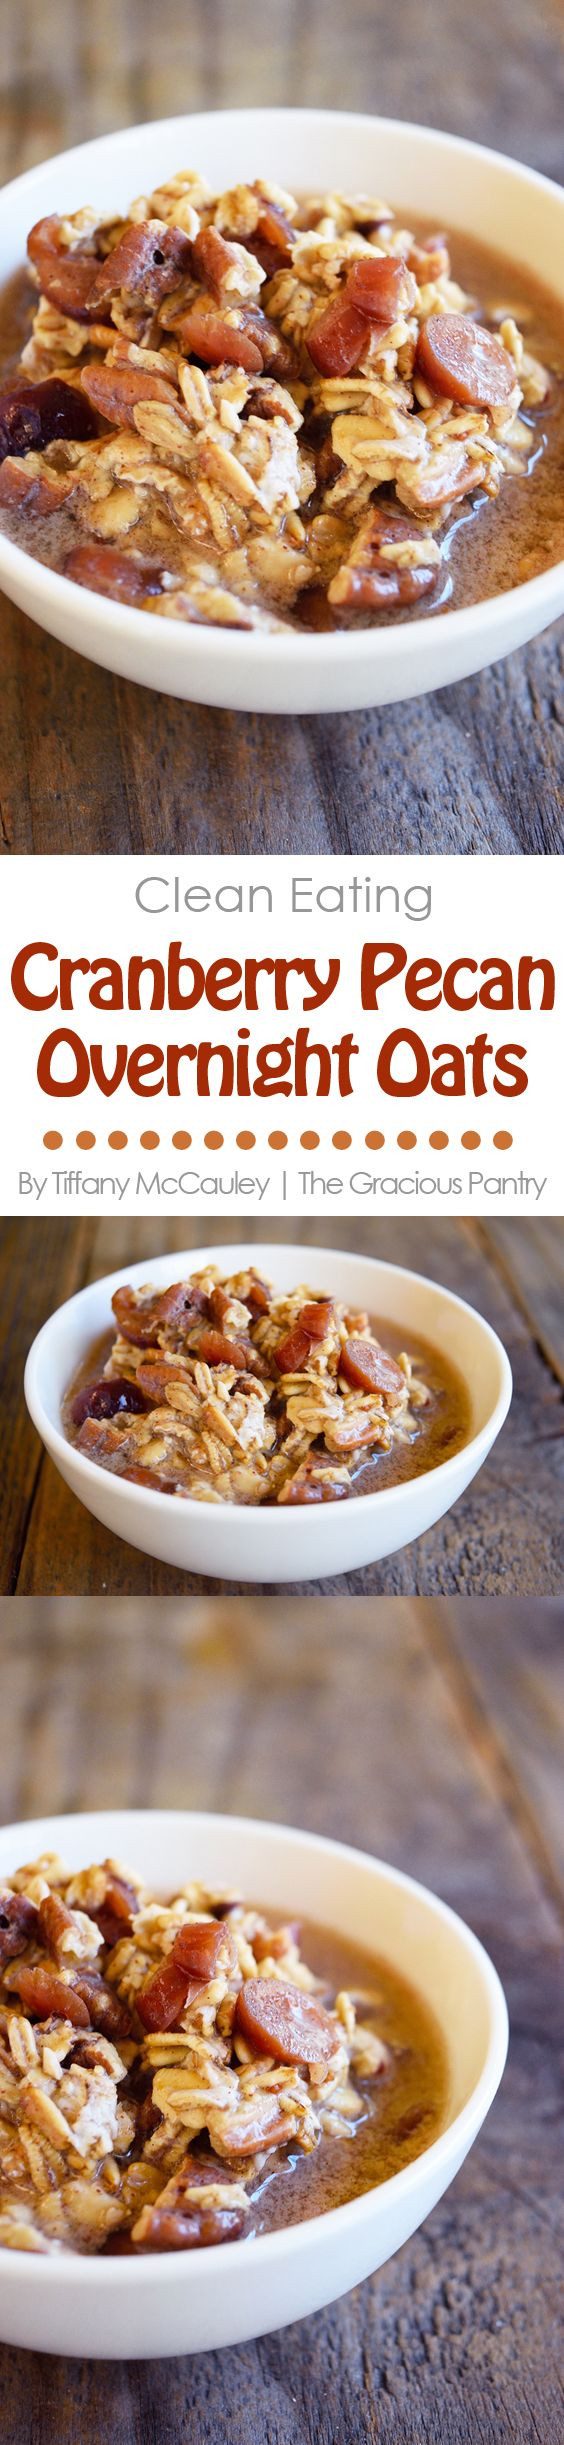 Clean Eating Oatmeal
 245 best Clean Eating Breakfast Recipes images on Pinterest